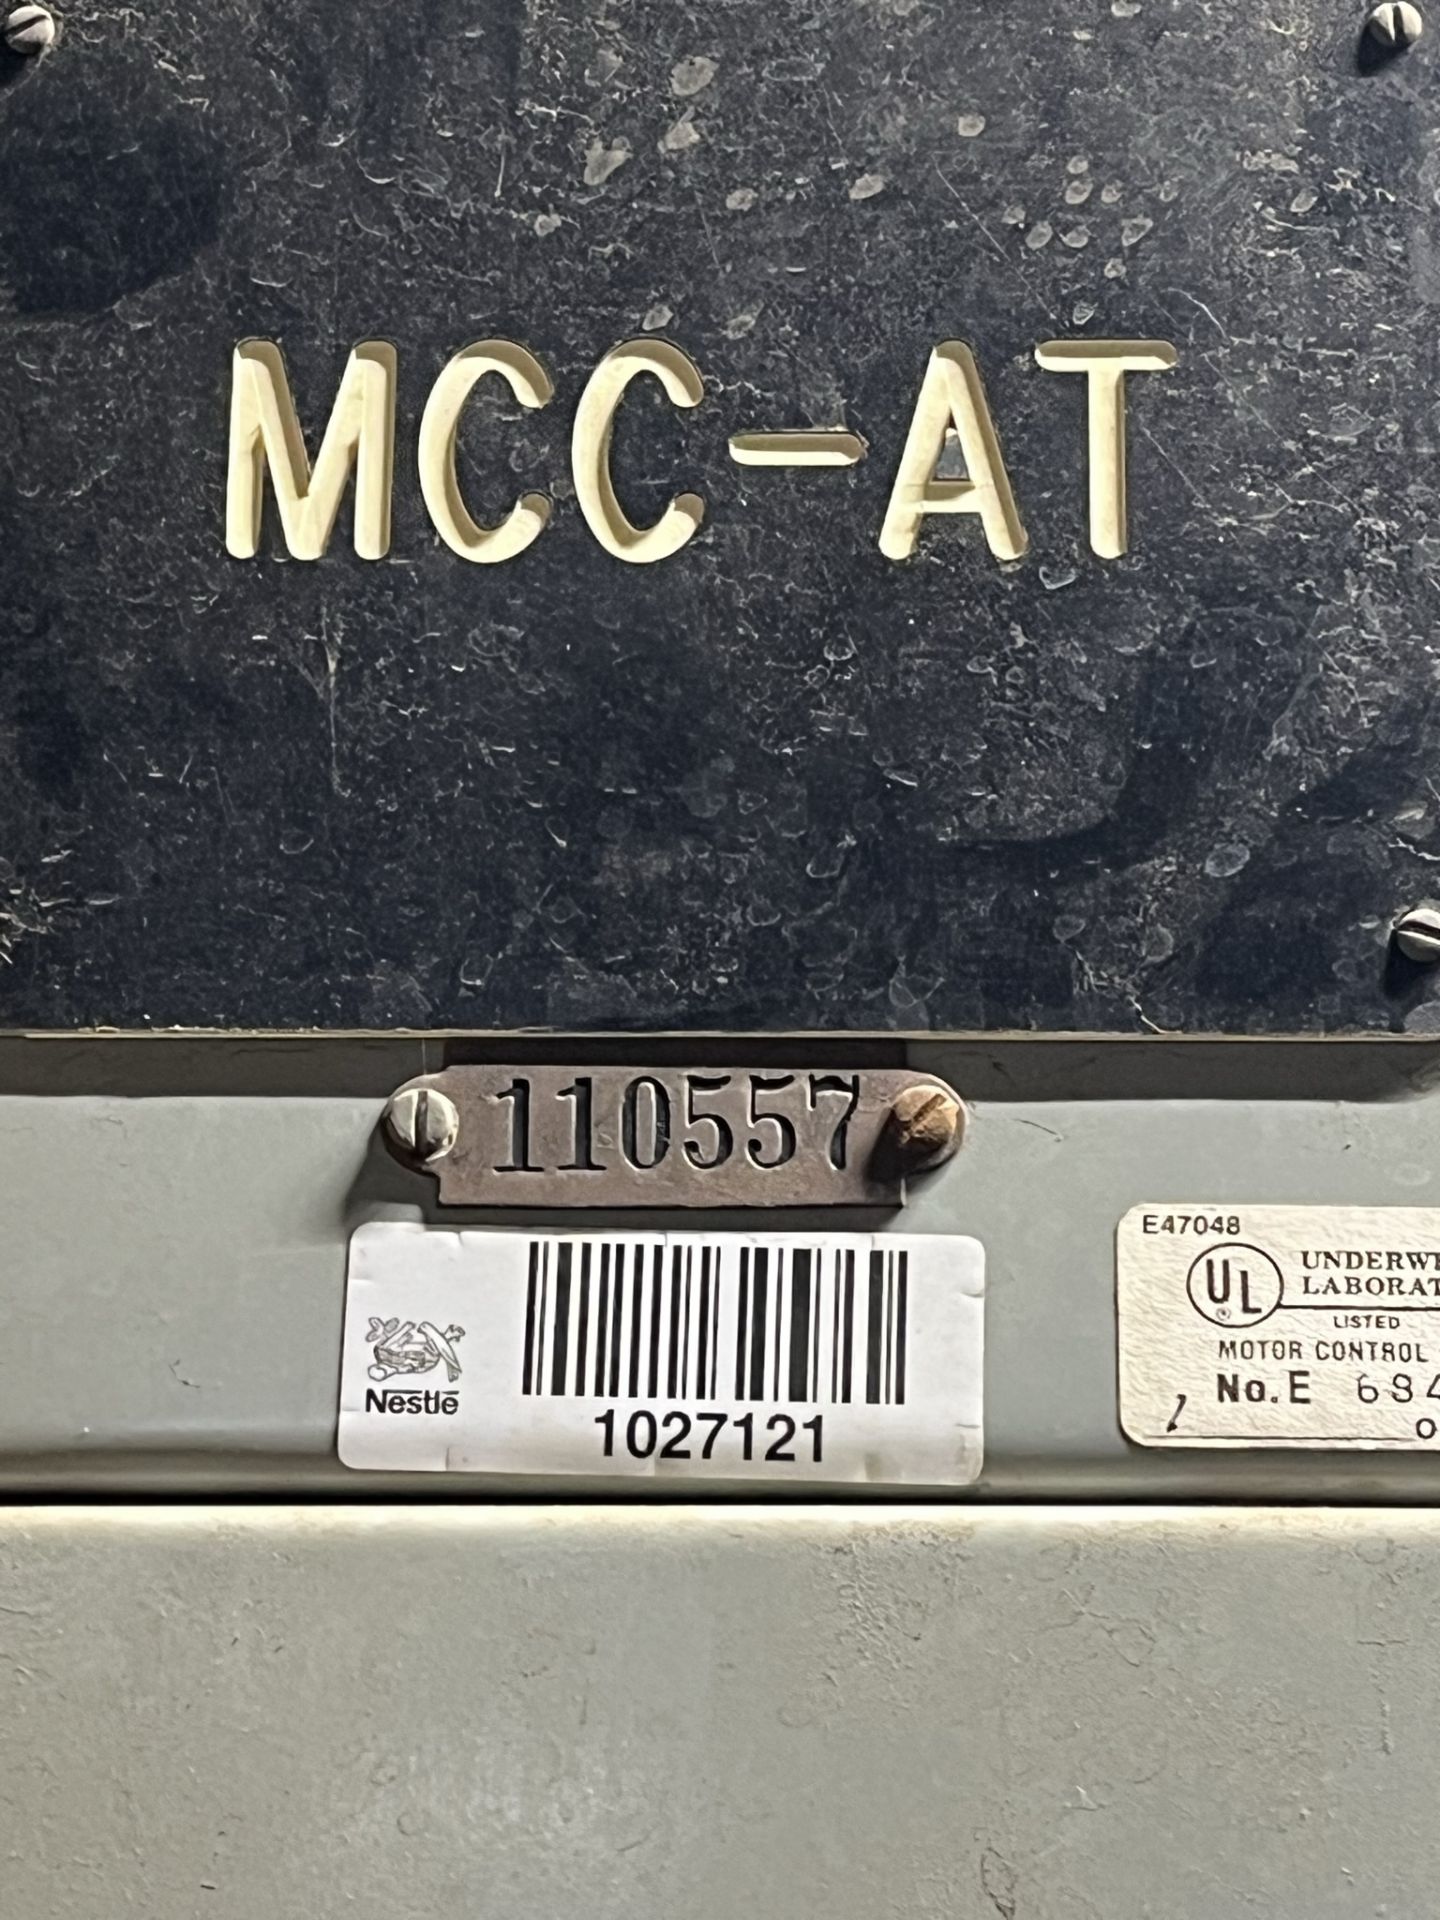 MOTOR CONTROLS MCC-AT SERIES 2100 NA16348 480V 3PH 3W 60 HZ SECT. 1-600A SECT.2-6-300A - Image 4 of 6